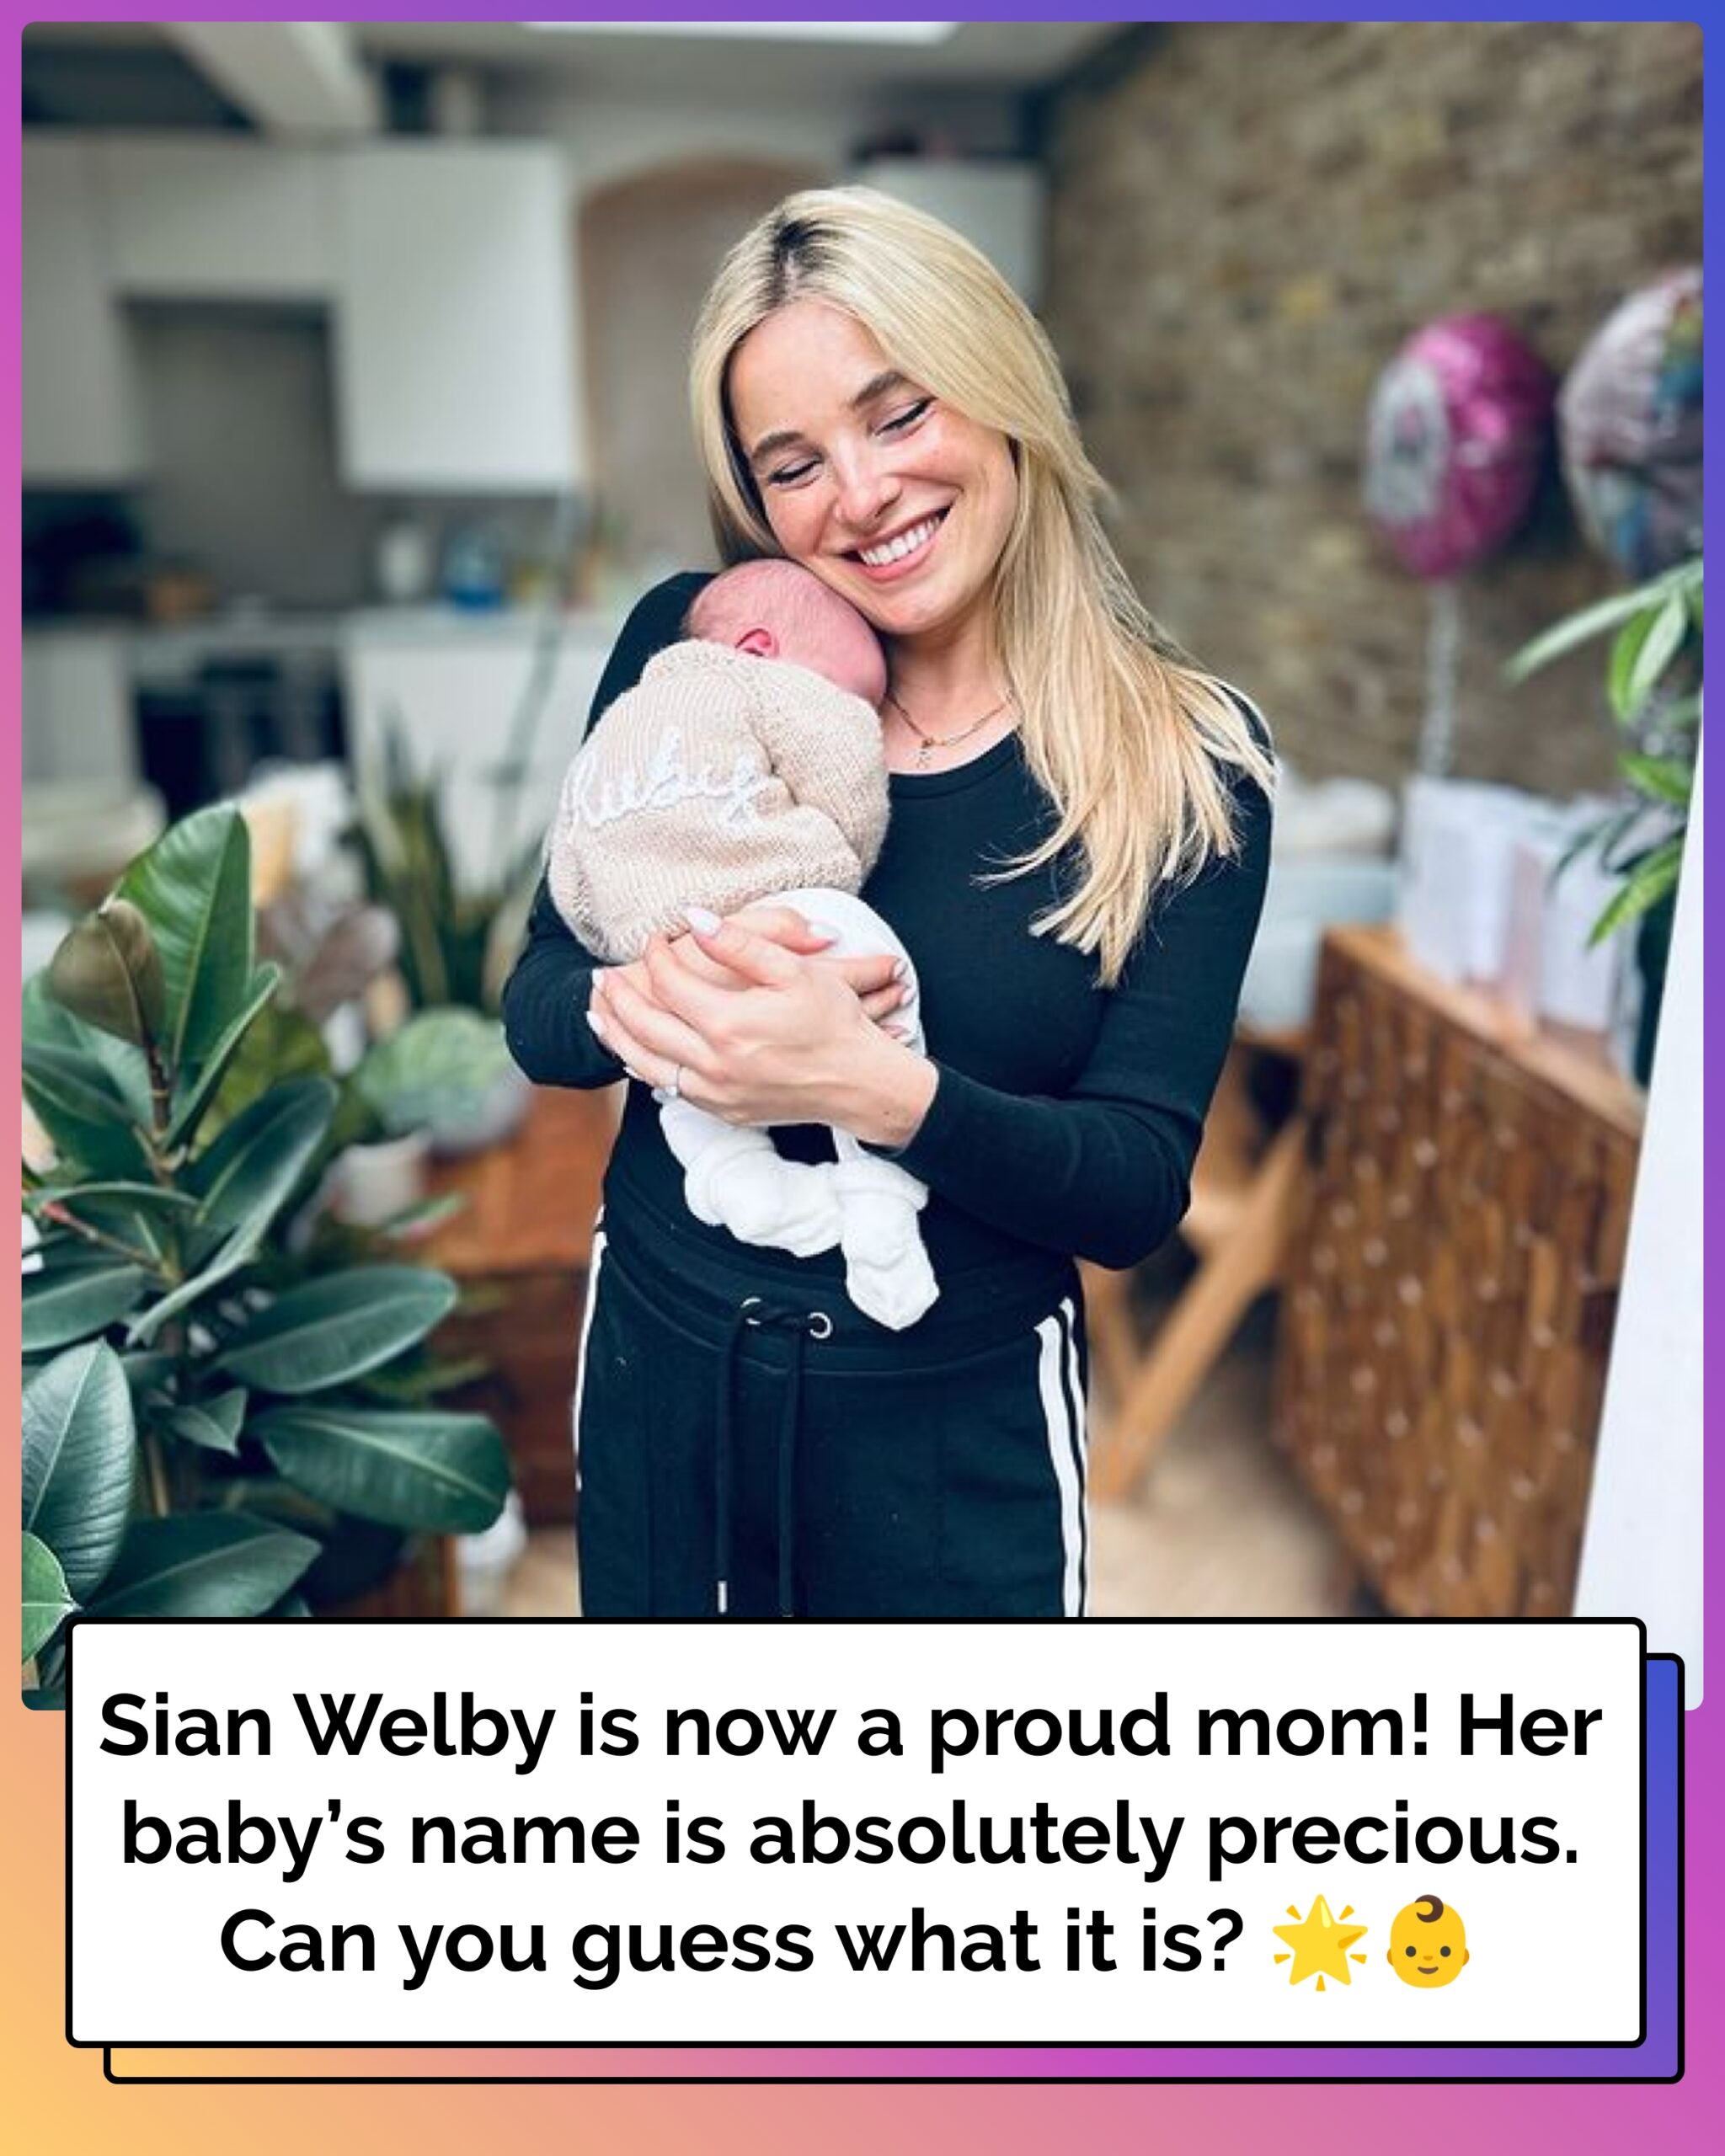 This Morning Presenter Sian Welby Announces Birth of First Child and Reveals Adorable Name